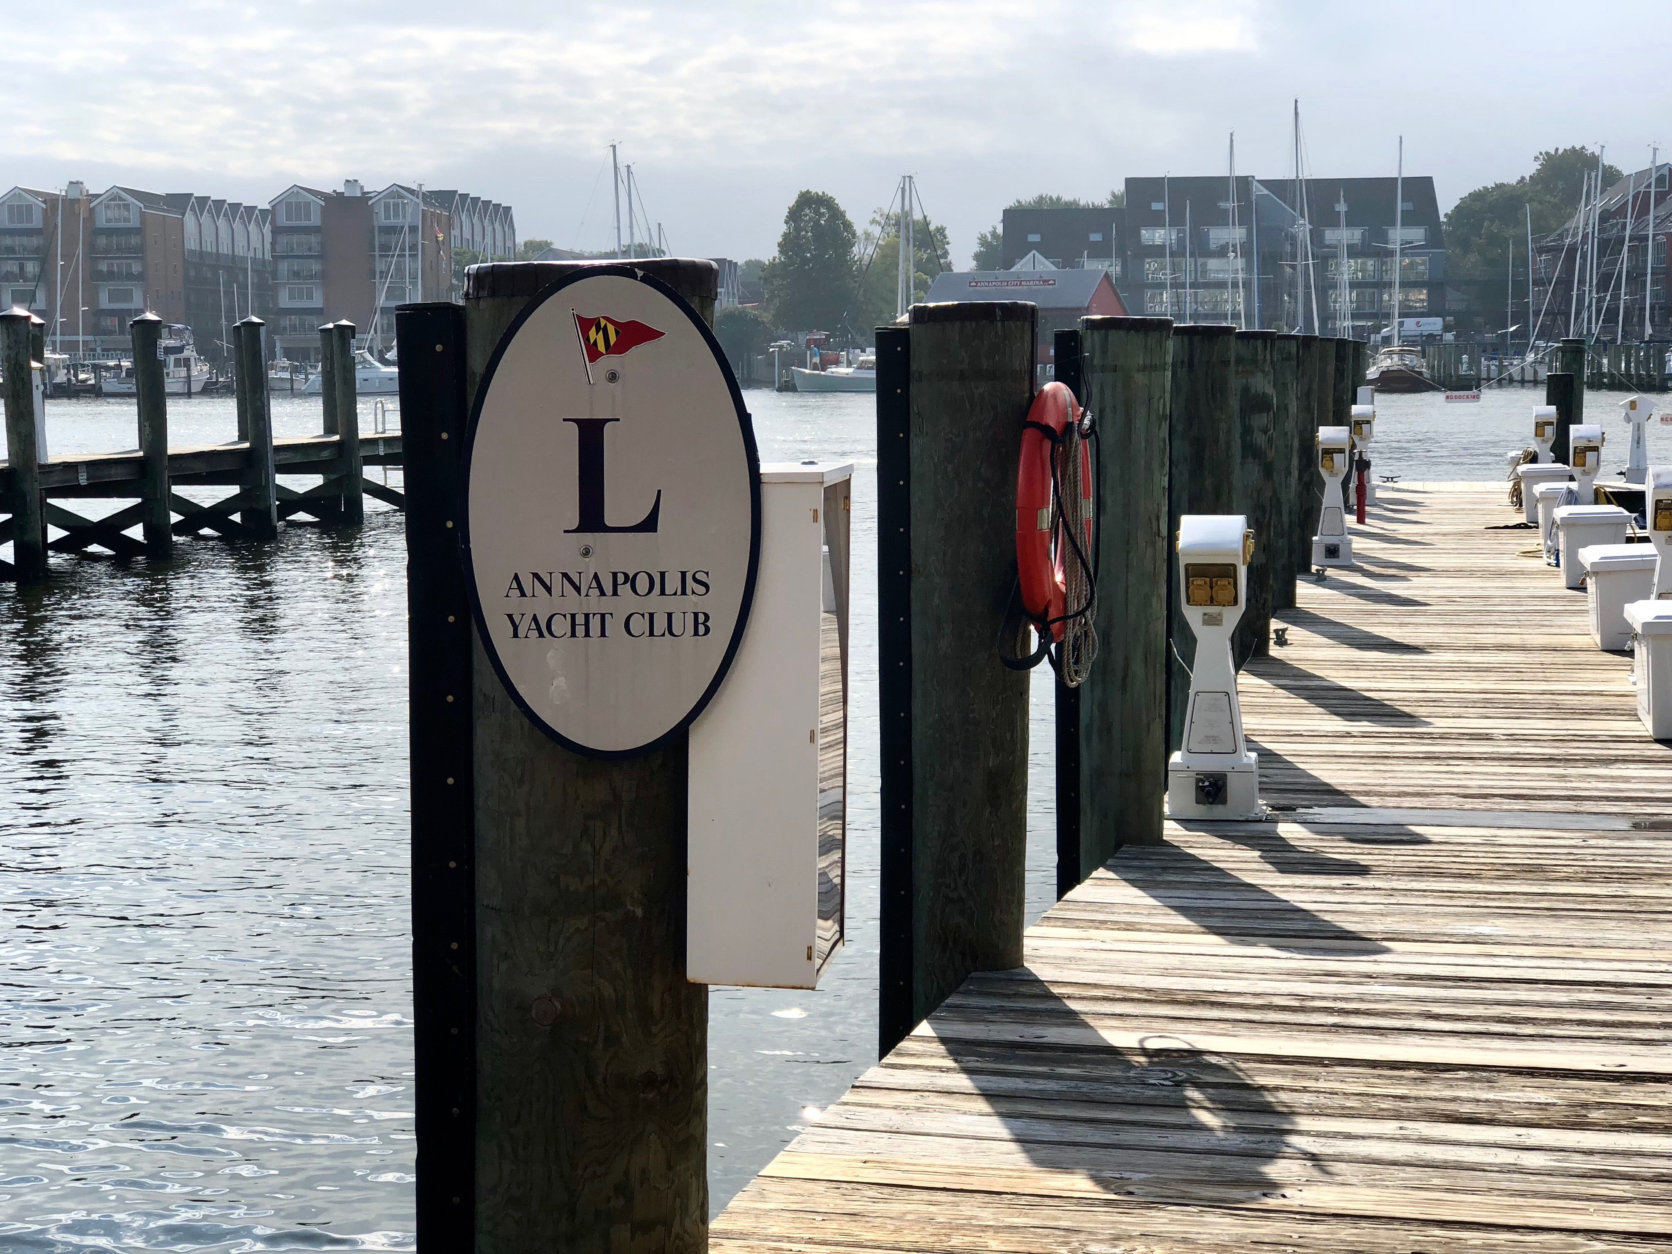 The view along Spa Creek at the Annapolis Yacht Club. (WTOP/Kate Ryan)